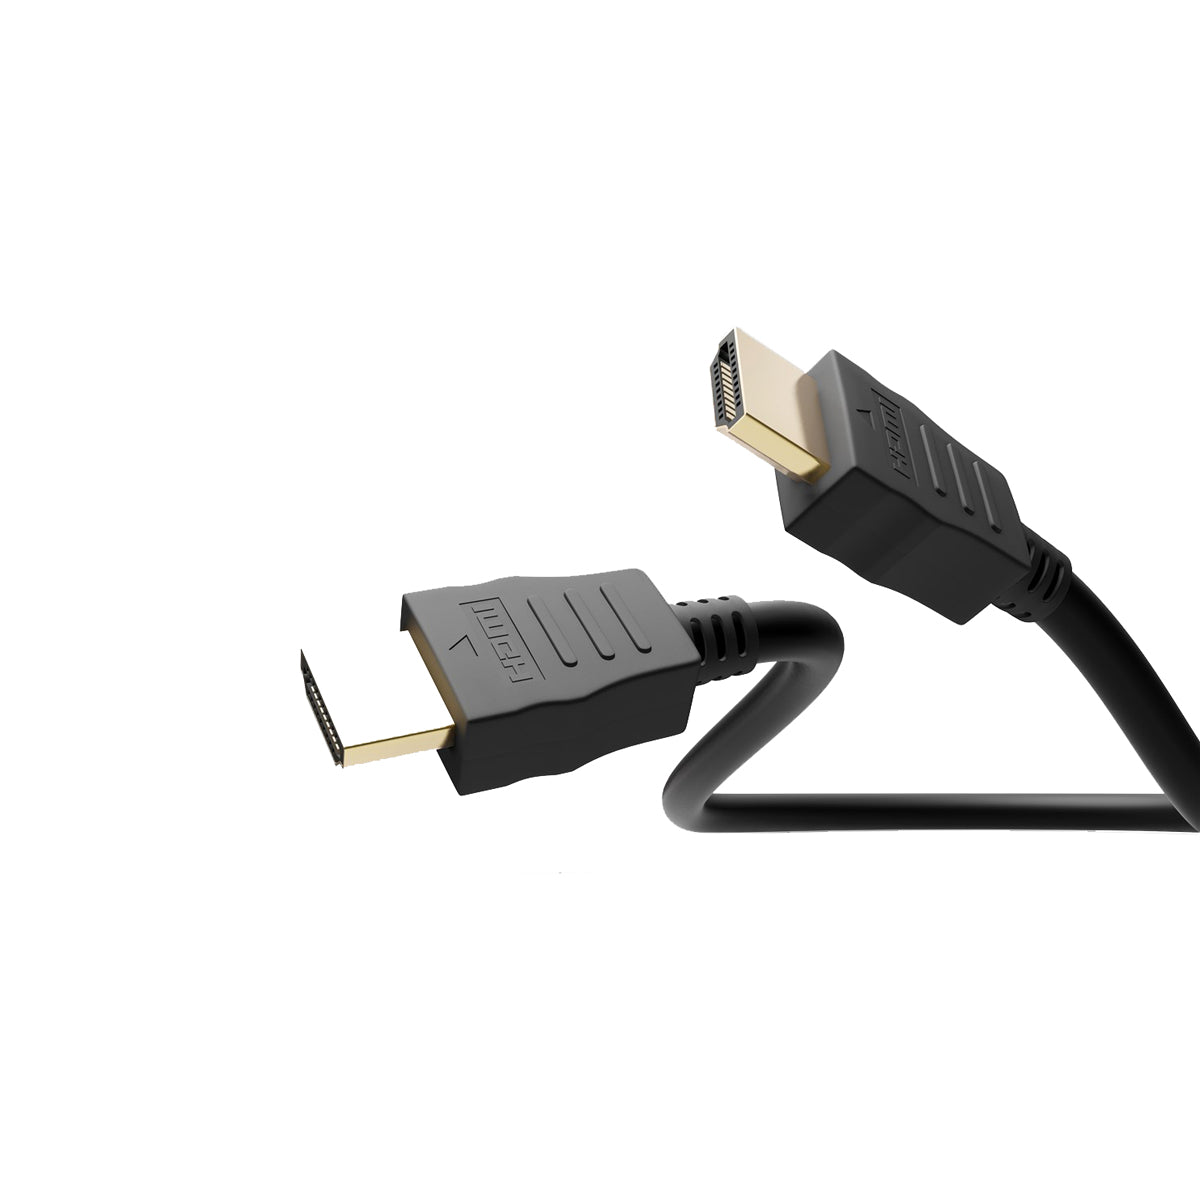 Goobay Series 2.0 HDMI Male > Male Cable with Ethernet 0.5M for PlayStation or Xbox - Black.